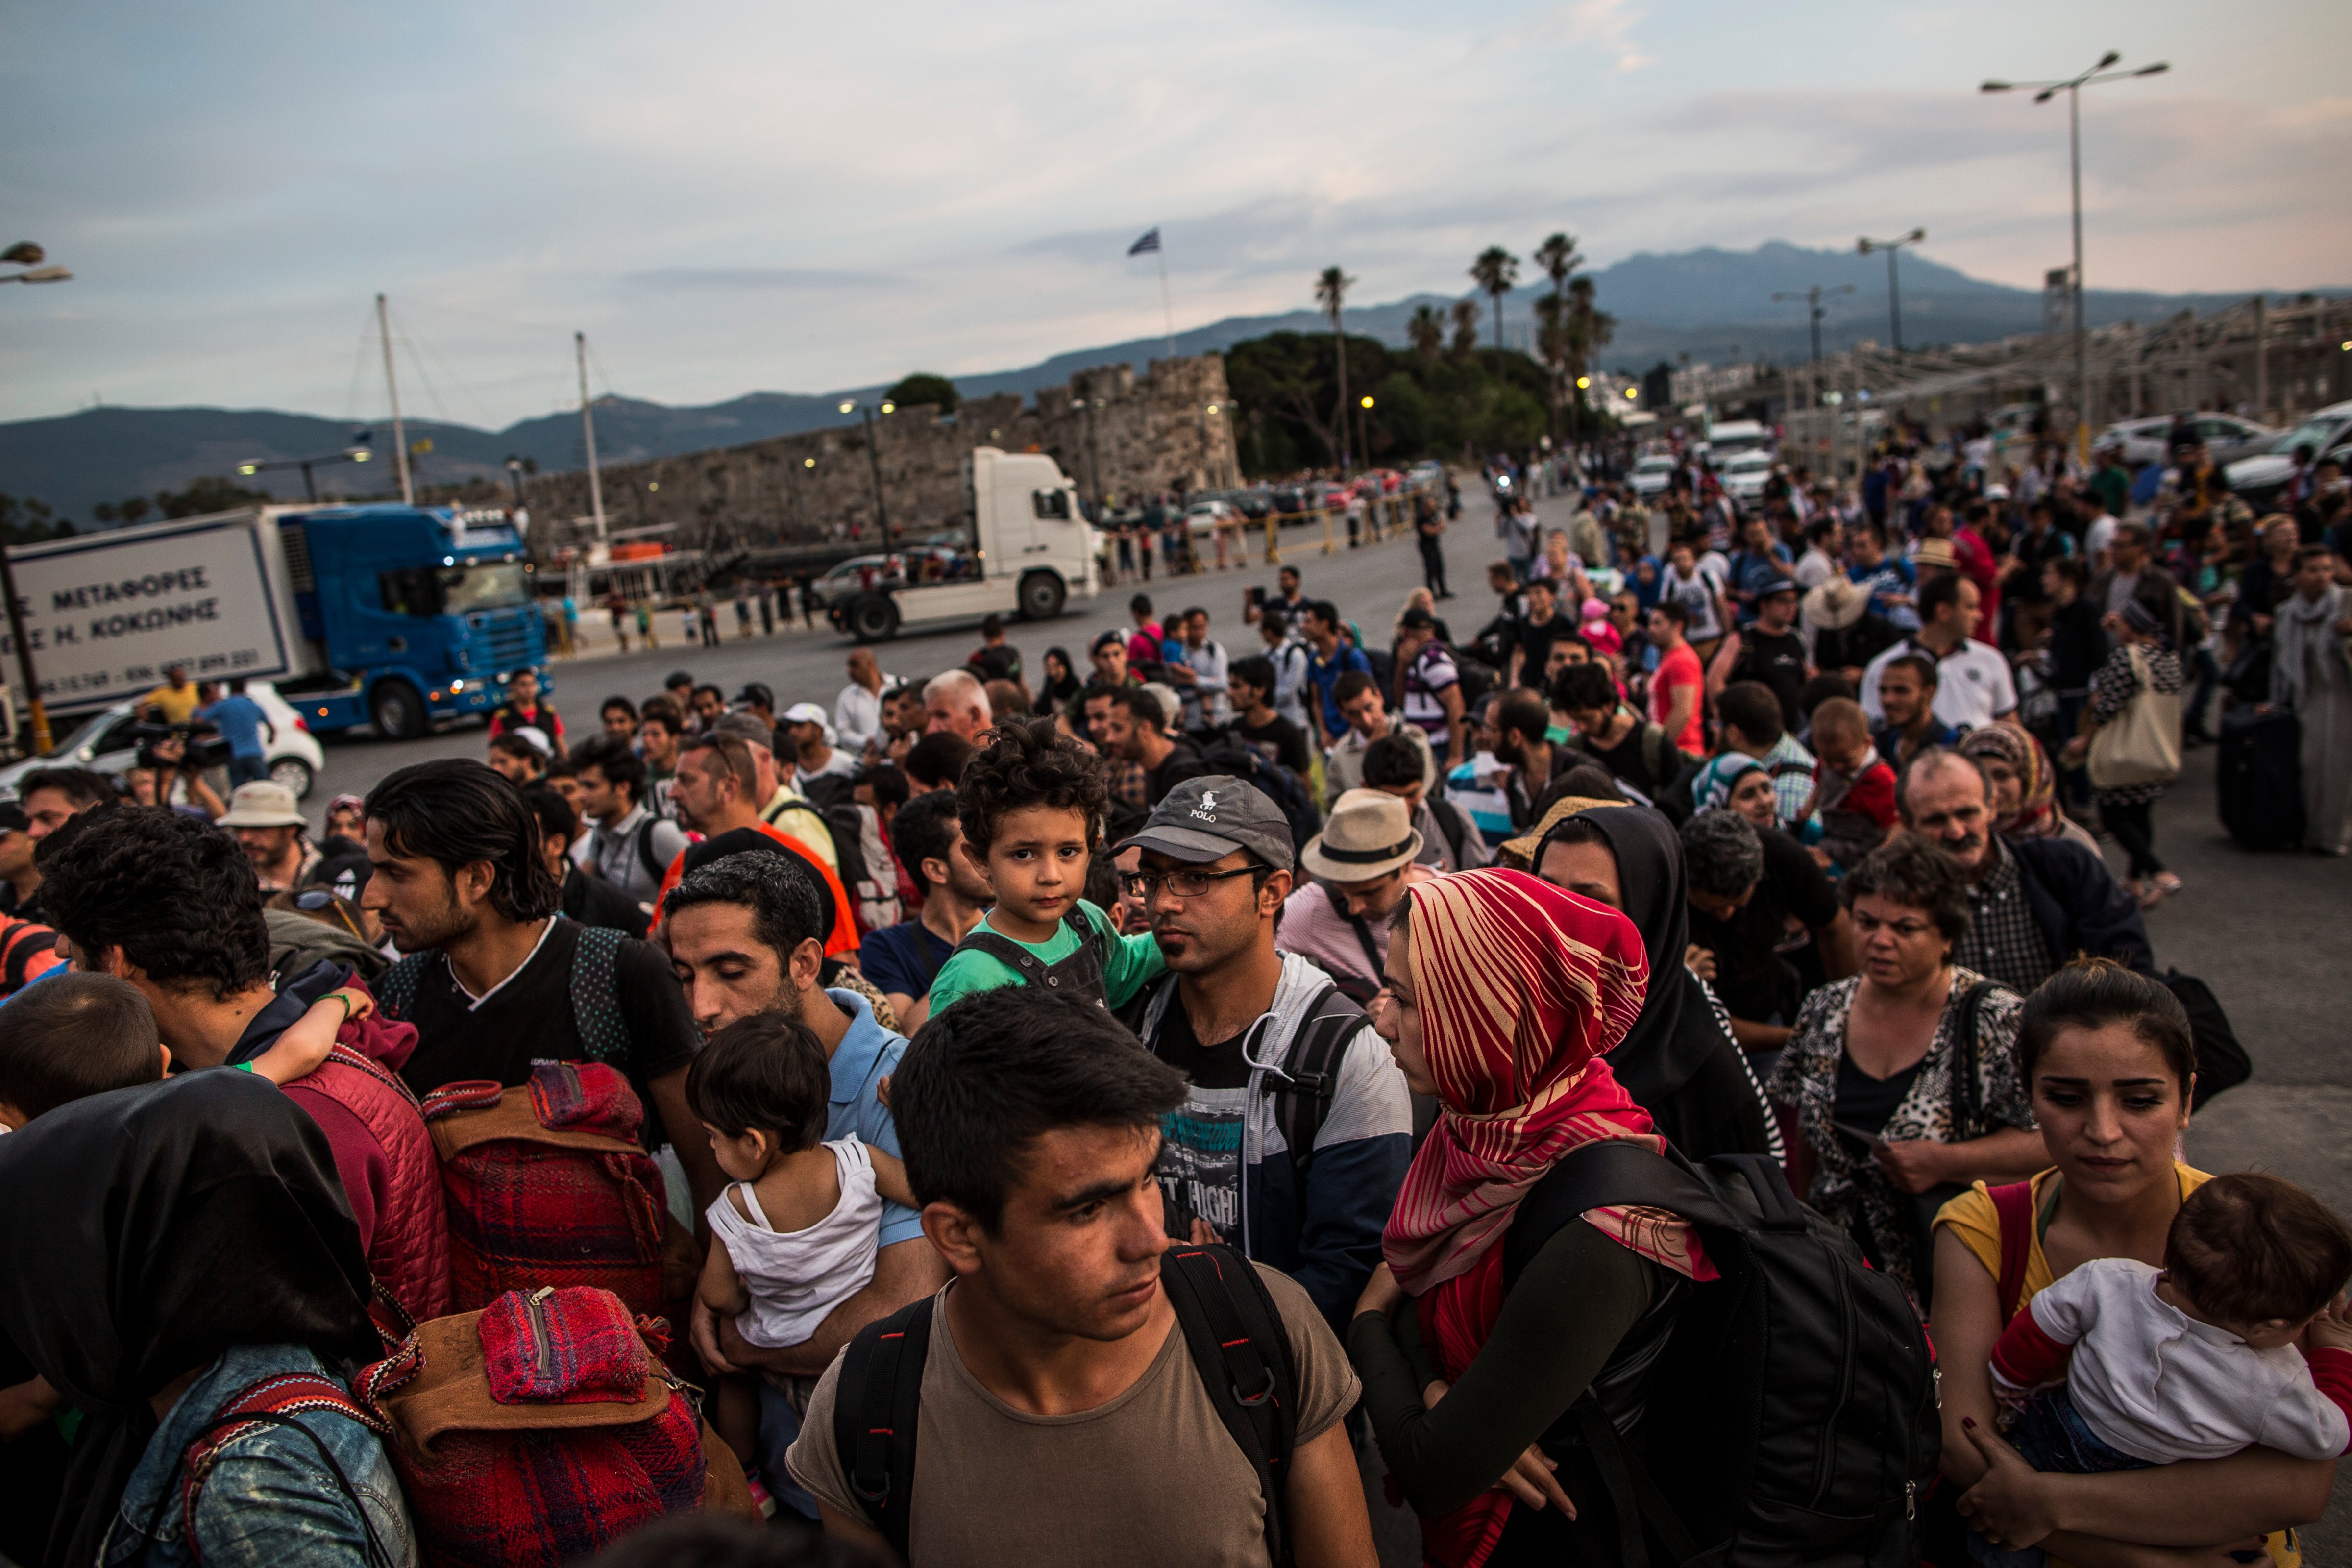 Hundreds of migrant men, women and children along with tourists and locals board a ferry bound for Athens on June 04, 2015 in Kos, Greece.